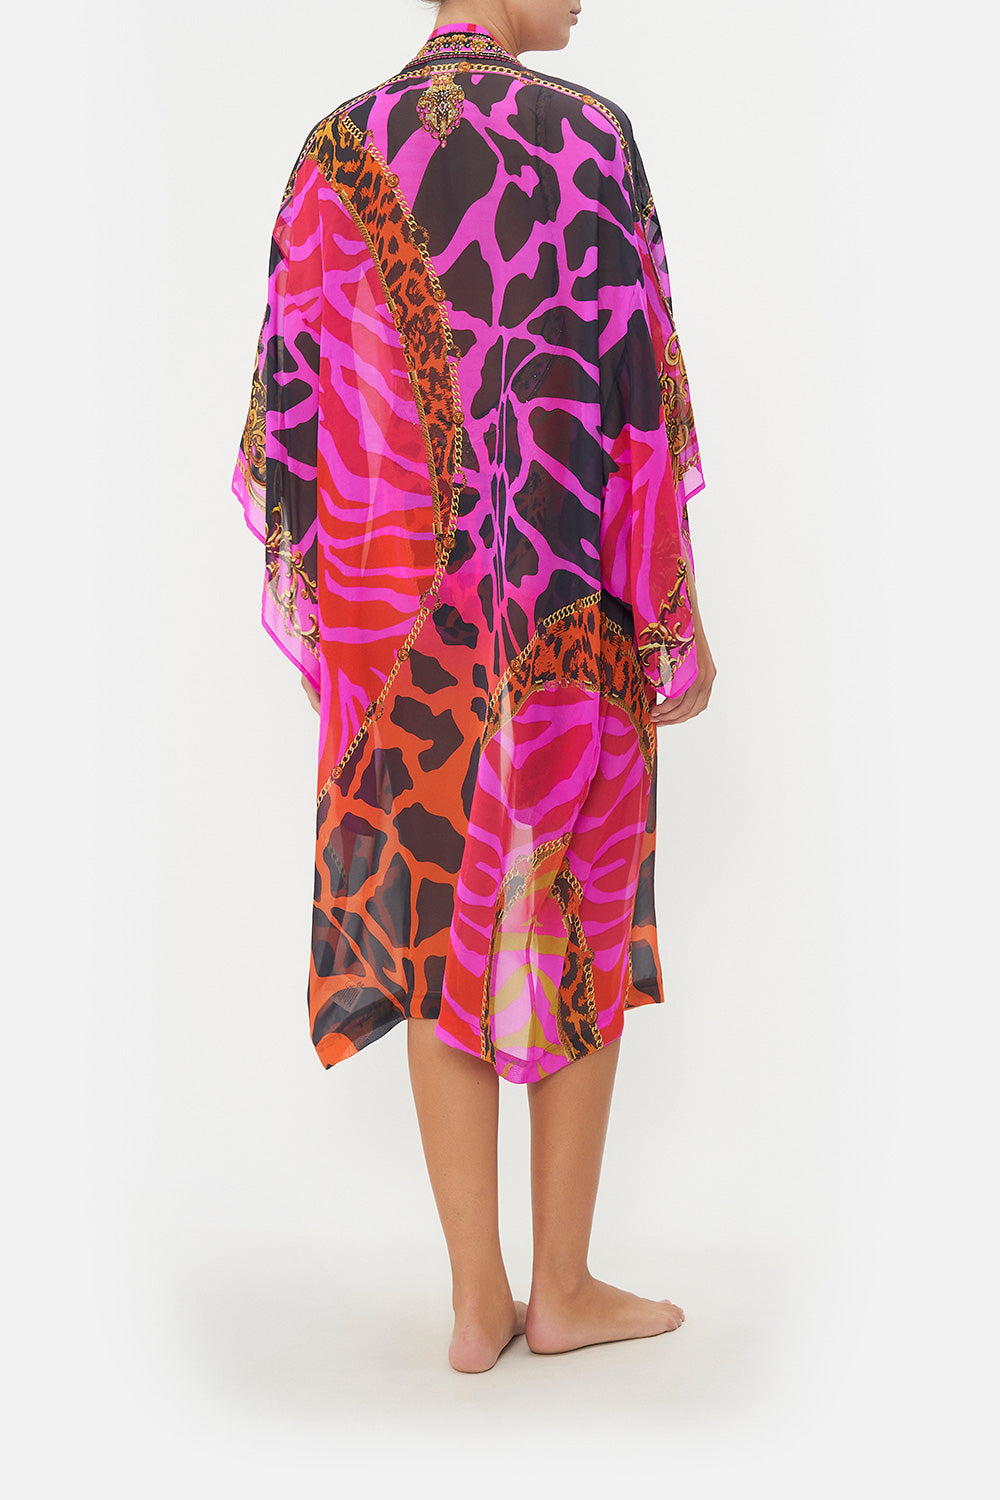 MID LENGTH KIMONO LAYER WITH COLLAR ALWAYS CHANGE YOUR SPOTS